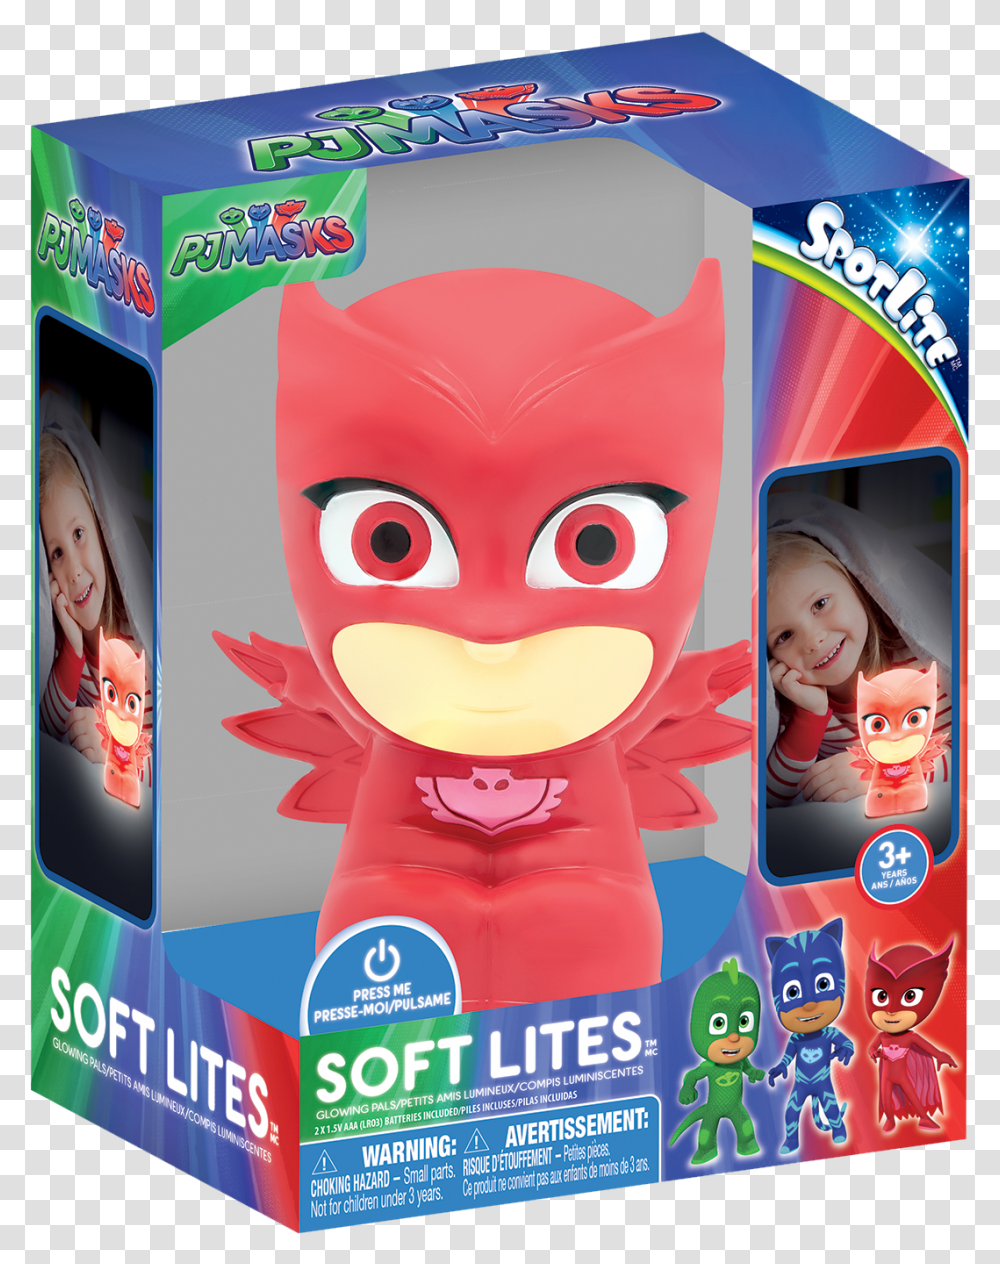 Glowing Ball Pj Masks Soft Lights, Person, Food, Advertisement, Poster Transparent Png